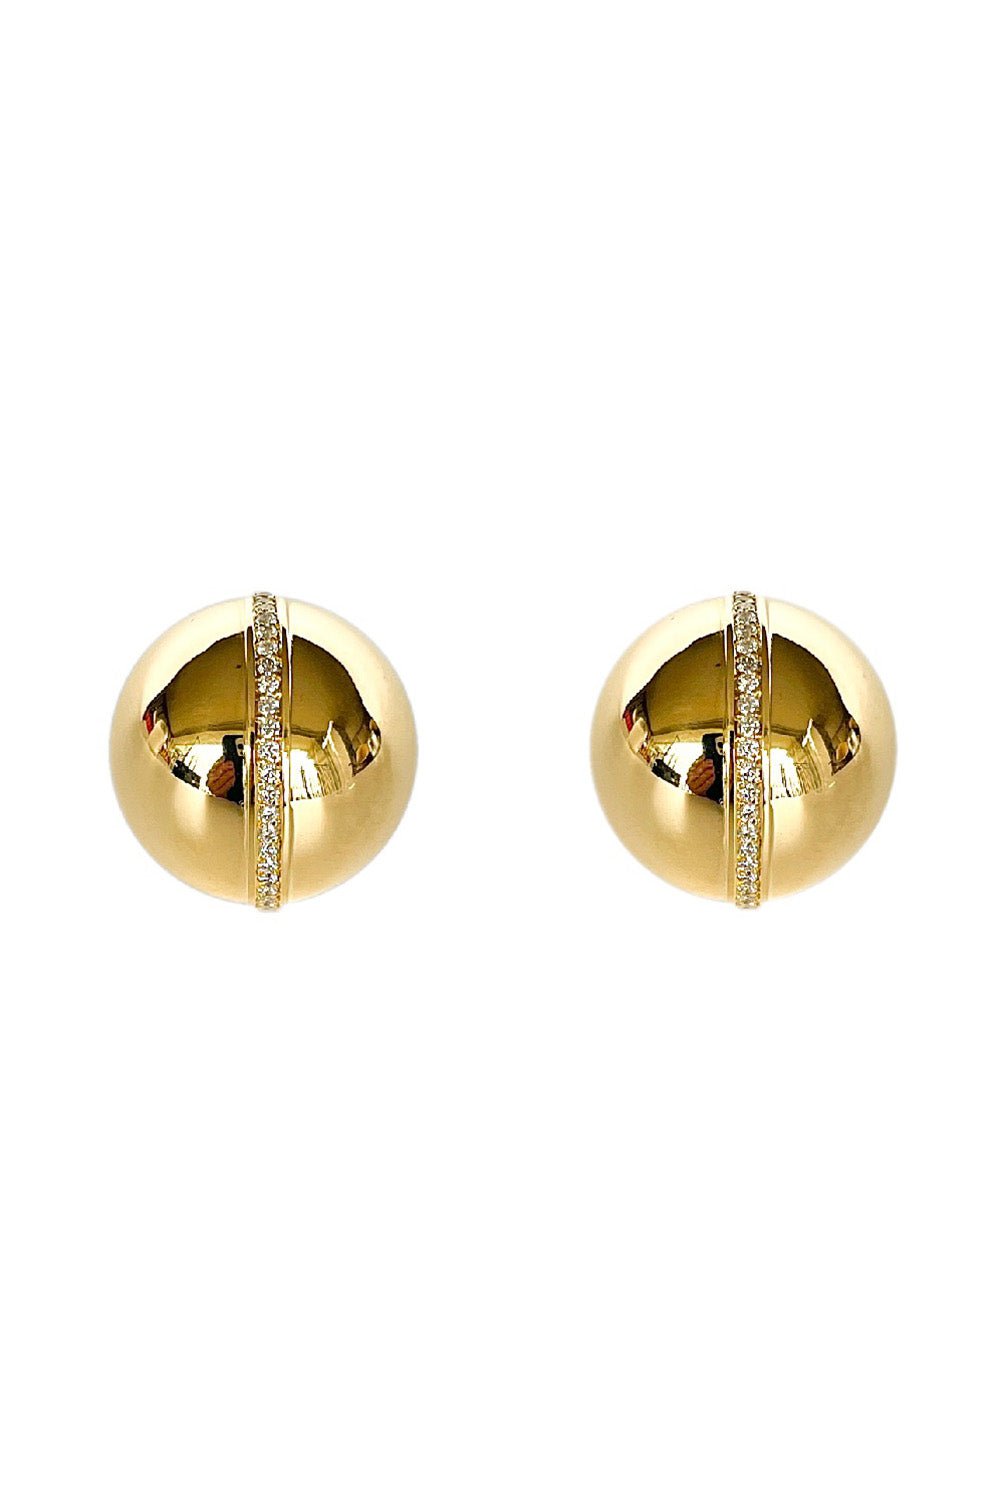 CASA CASTRO-Large Sphere Earrings-YELLOW GOLD